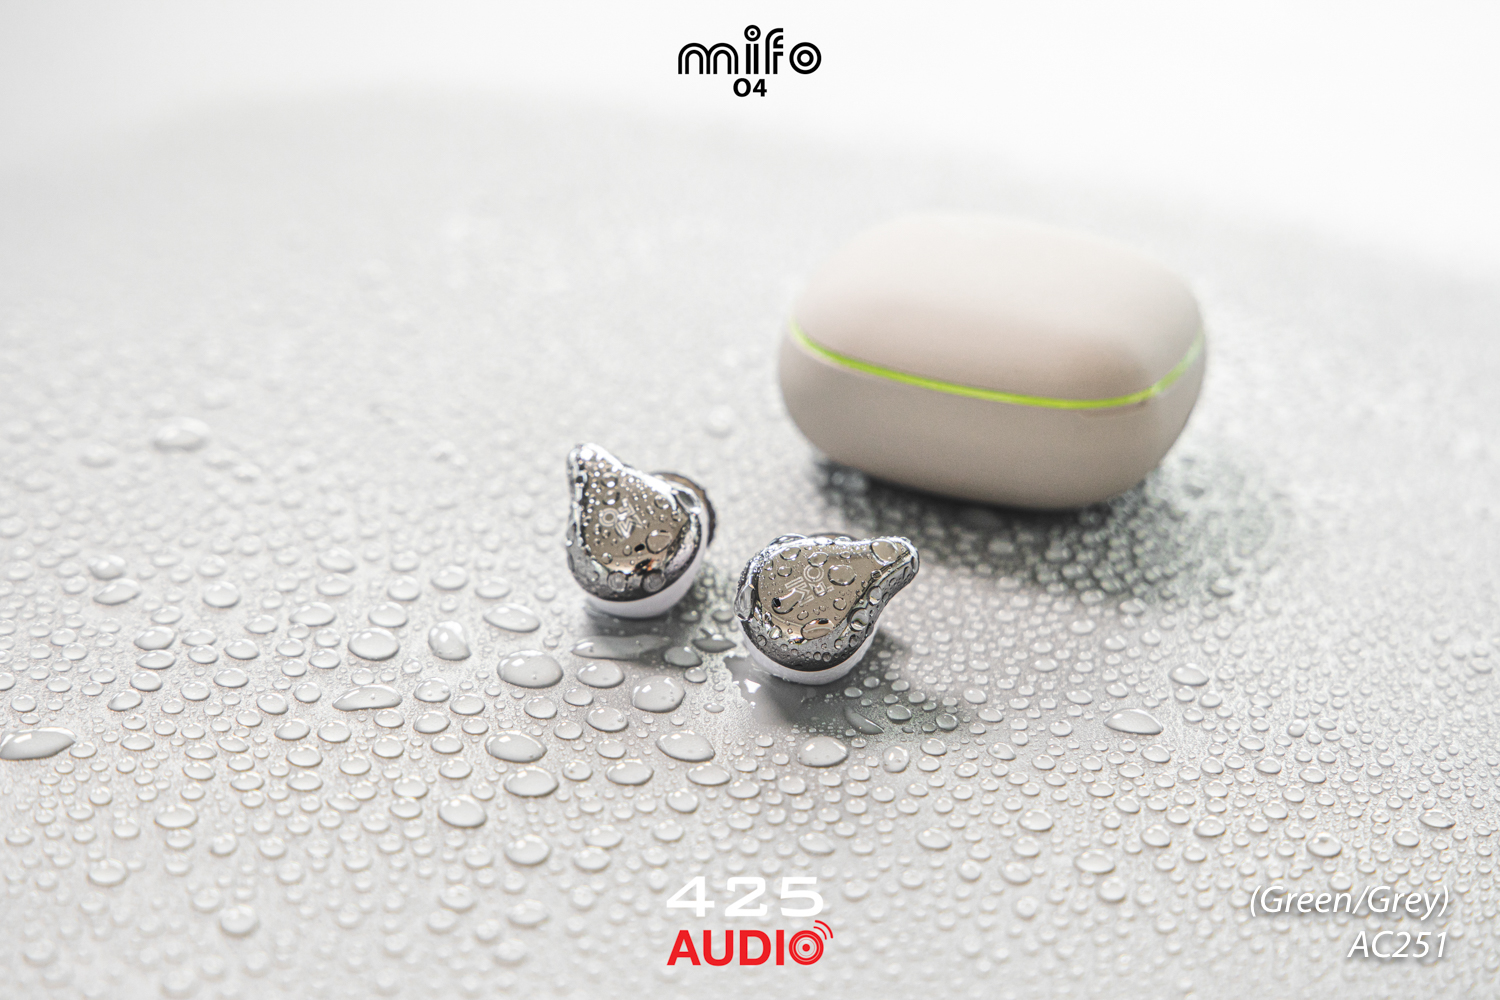 mifo,o4,true,wireless,ipx7,ambient,sound,wireless,charging,chi,-,fi,noise,reduction,rich,sound